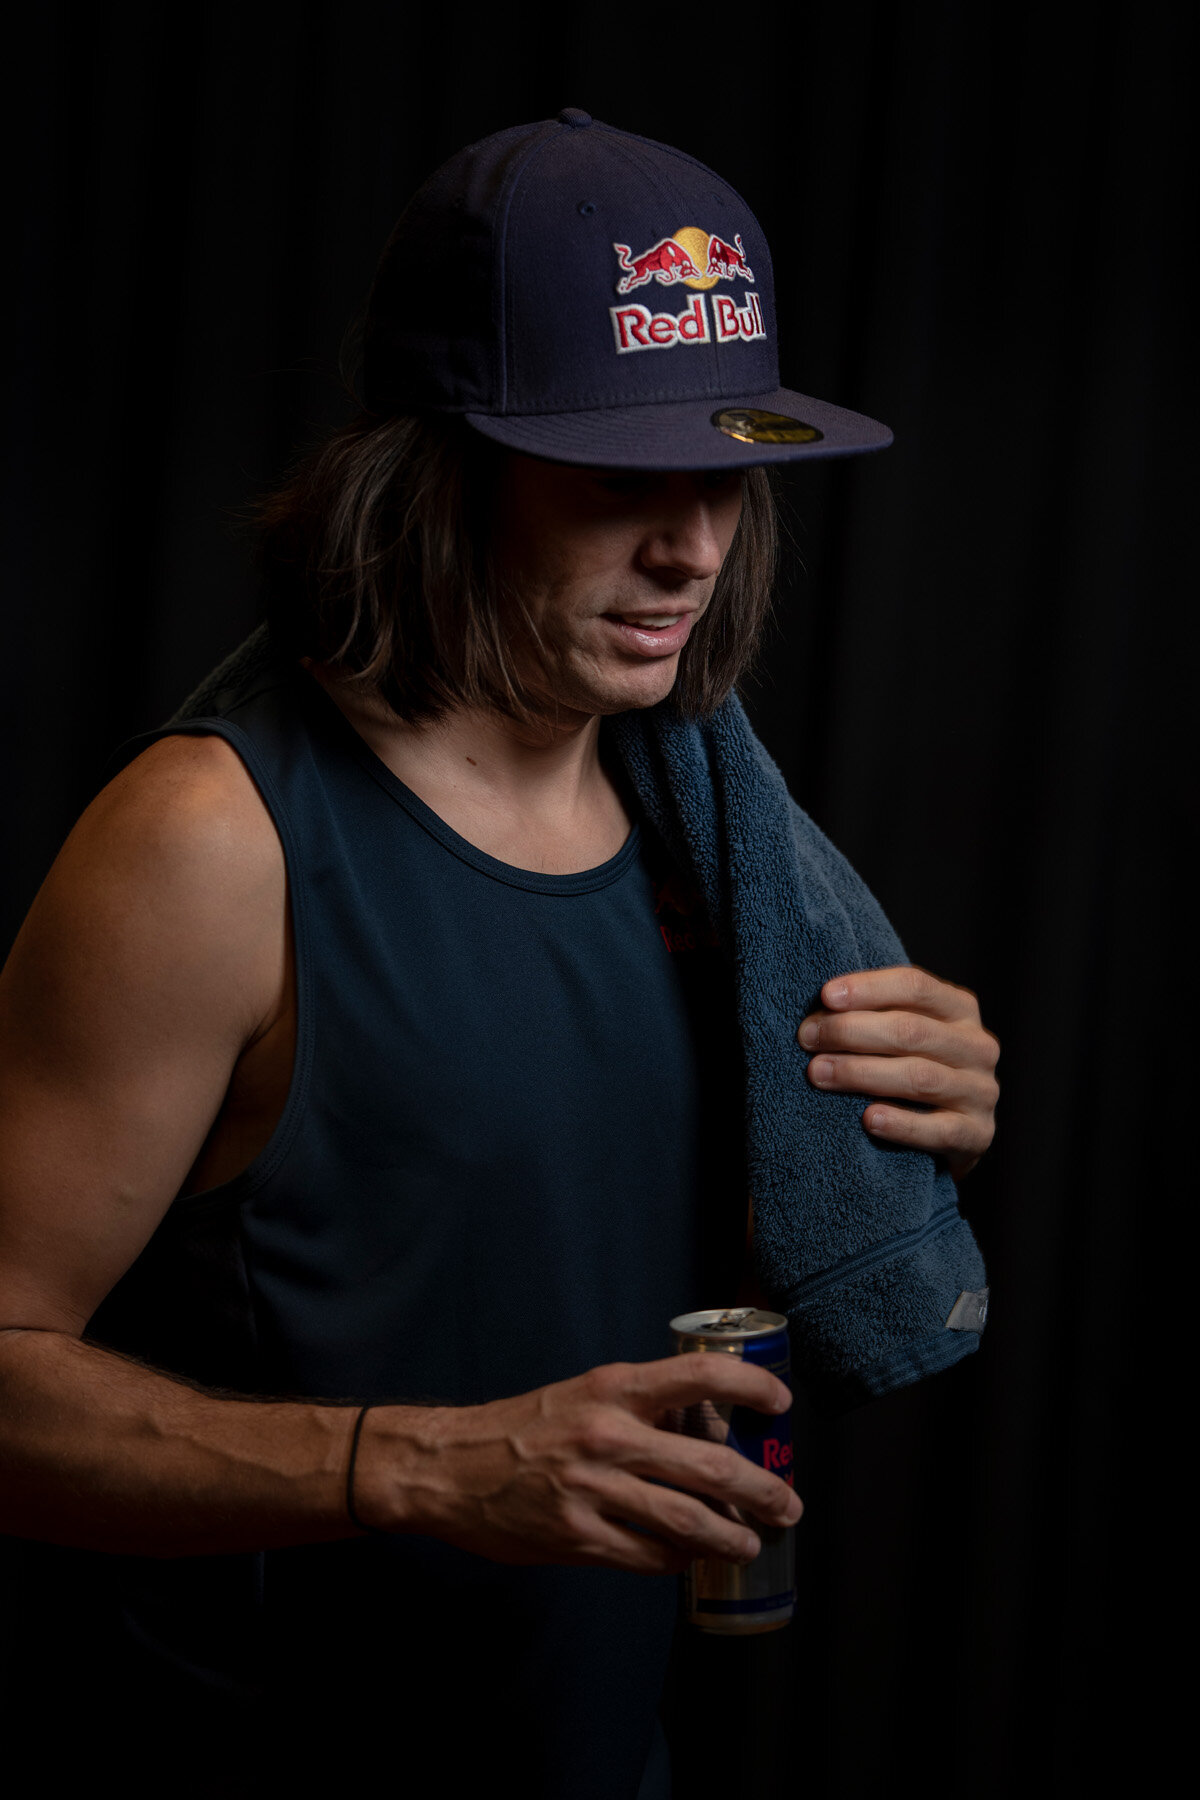  Daniel Dhers poses for a portrait during his visit to the Red Bull Athlete Performance Center in Salzburg on Febreruary 14, 2020 